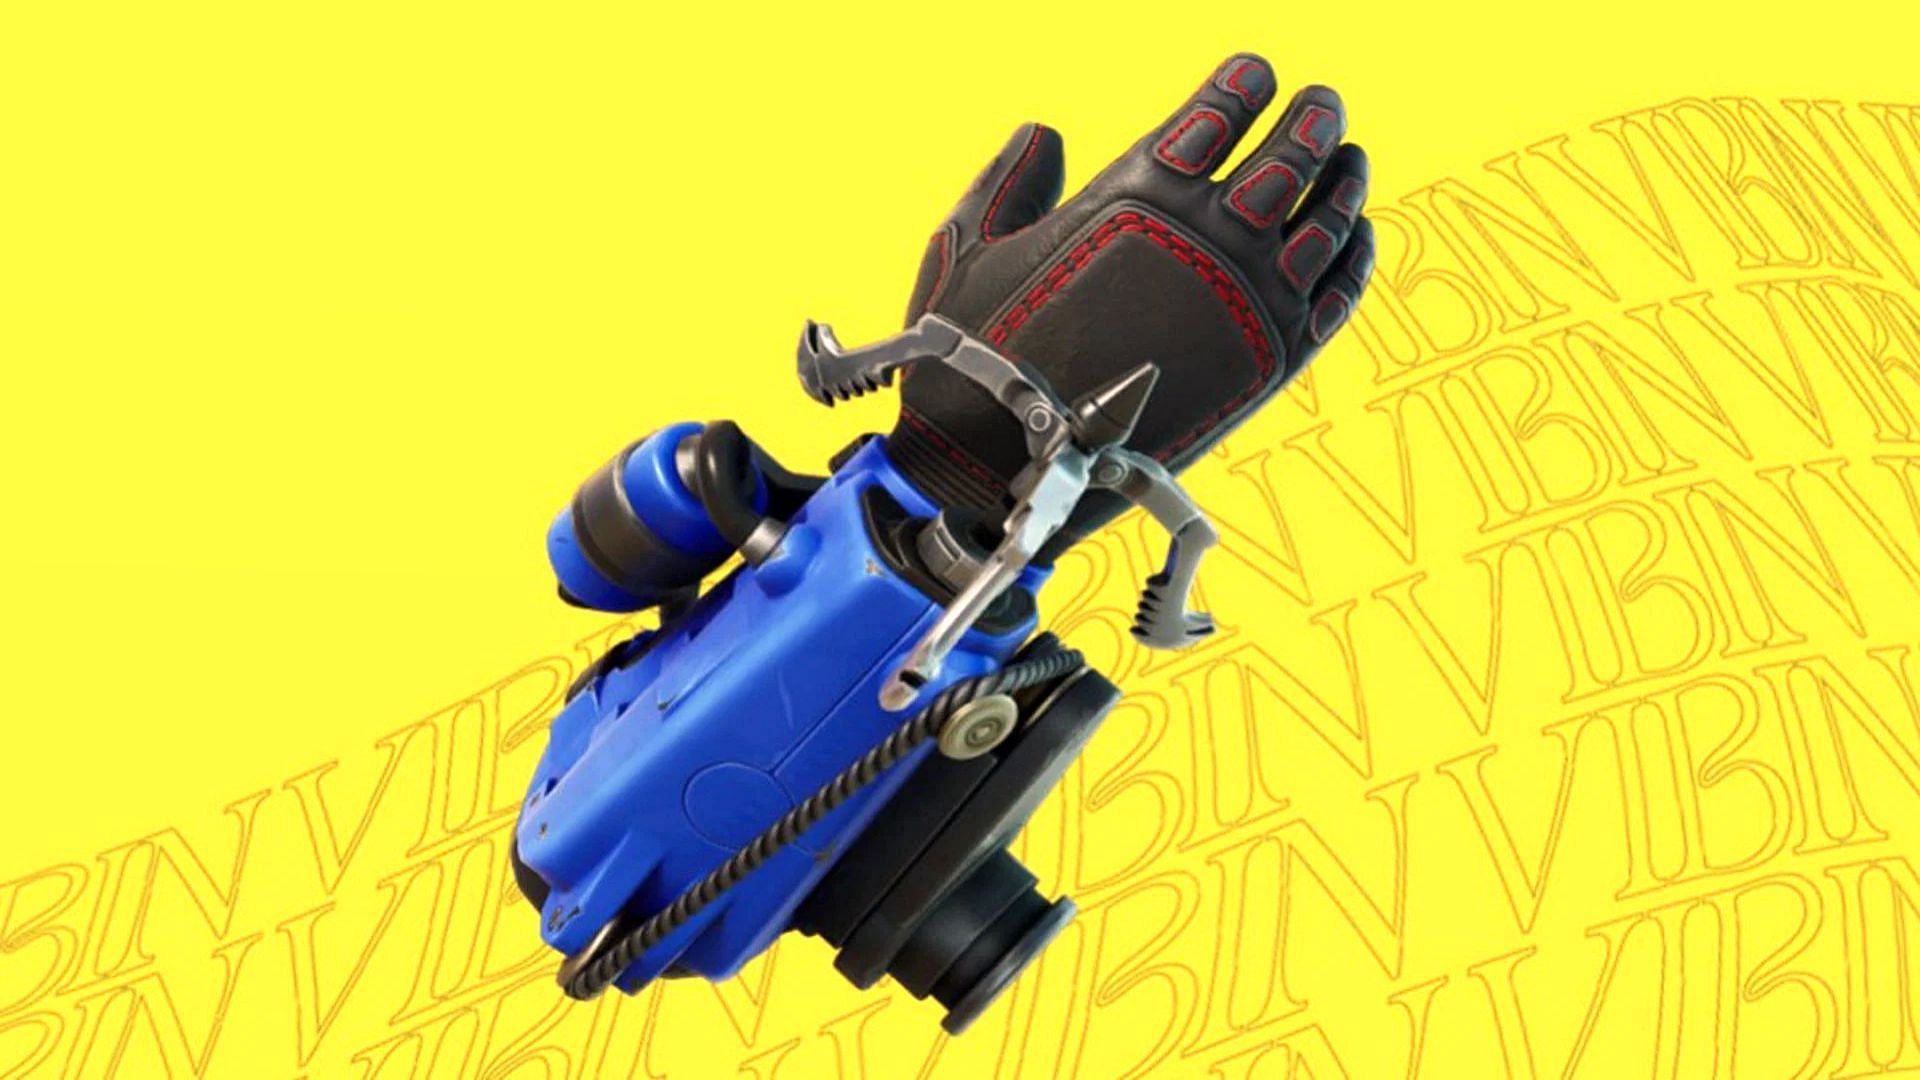 Grapple Gloves are great for mobility in Fortnite (Image via Epic Games/Fortnite)